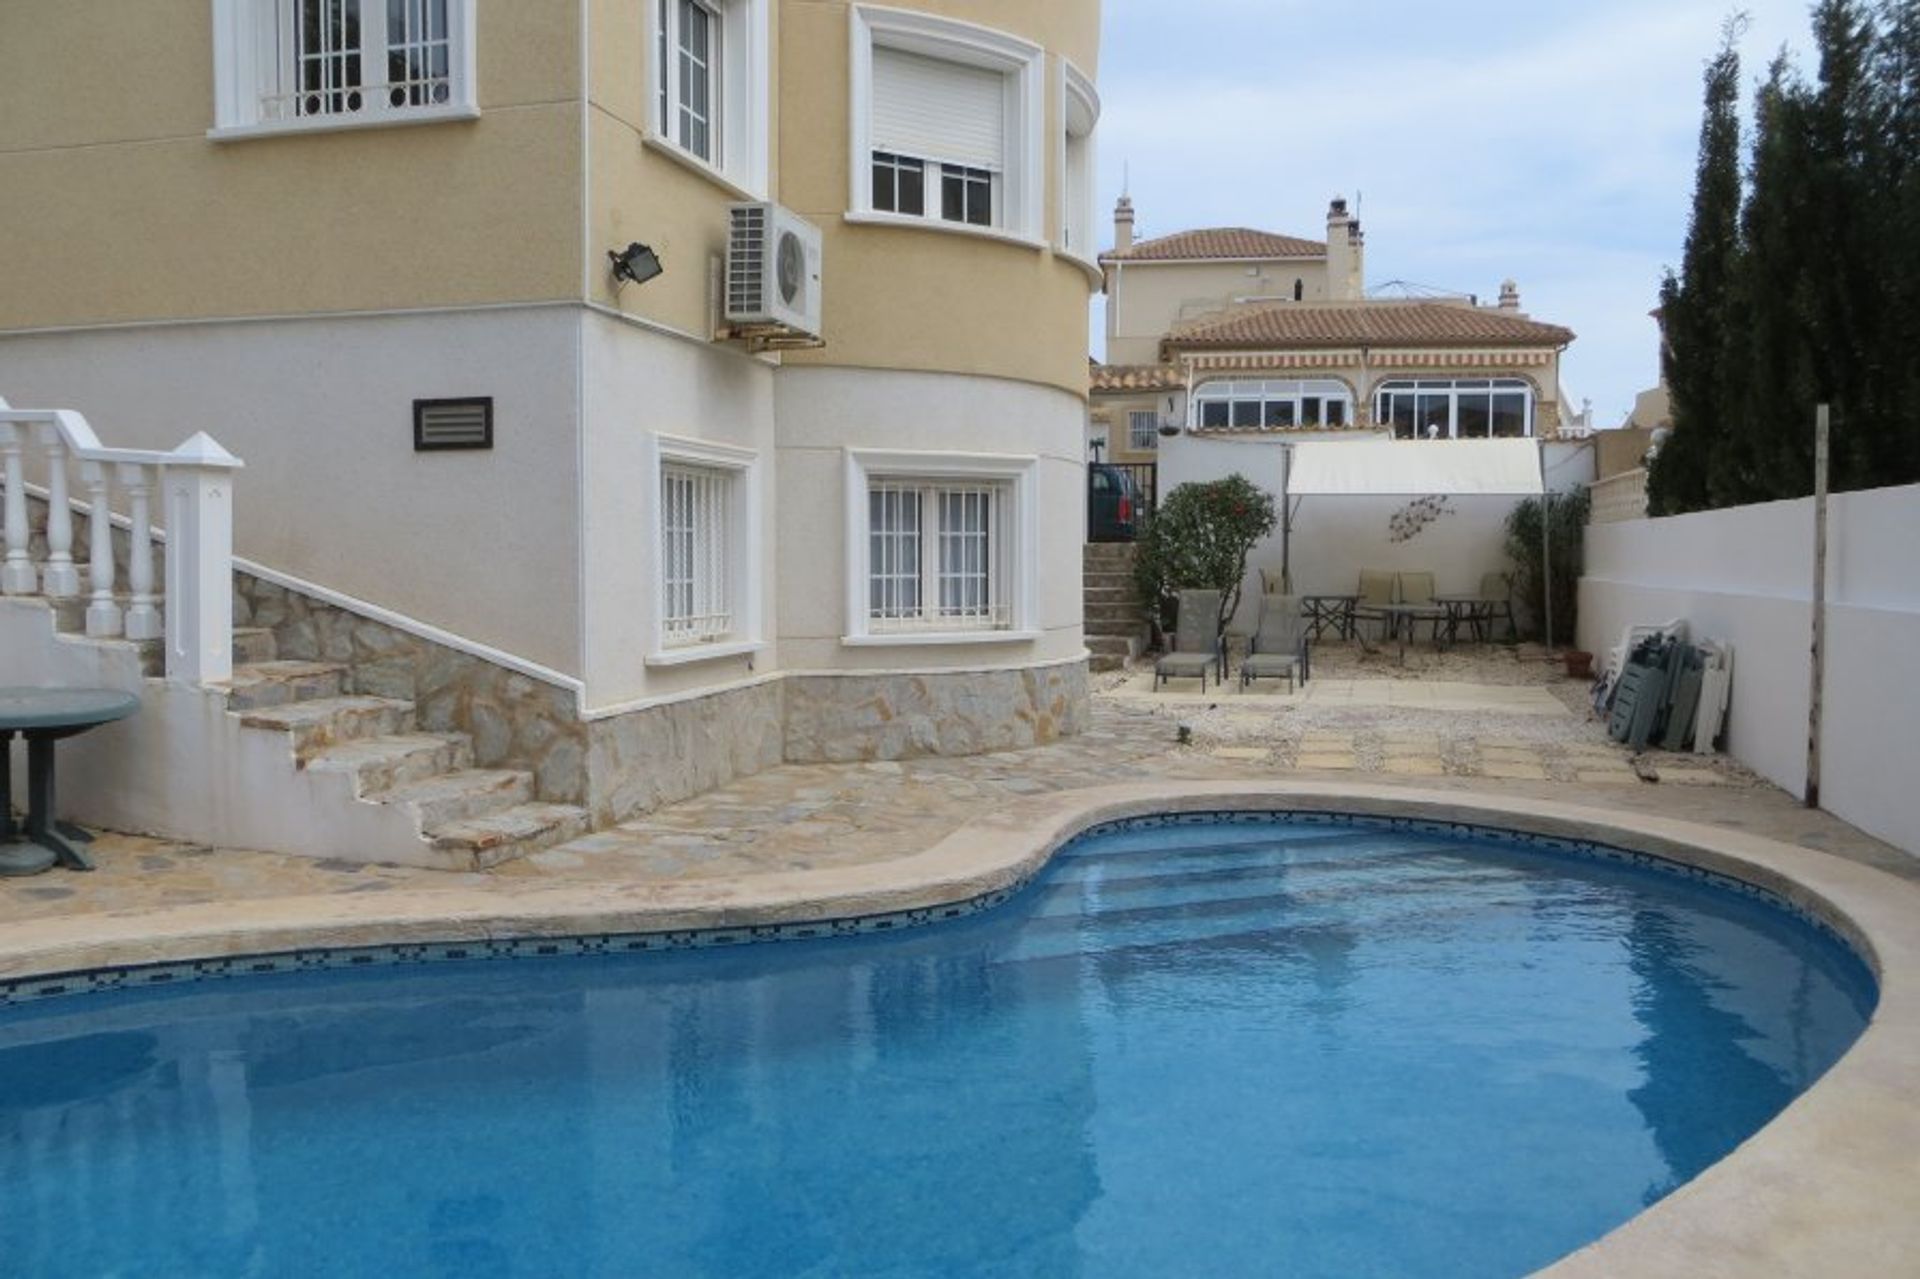 Explore our villas with private pools in San Miguel near the golf and beaches